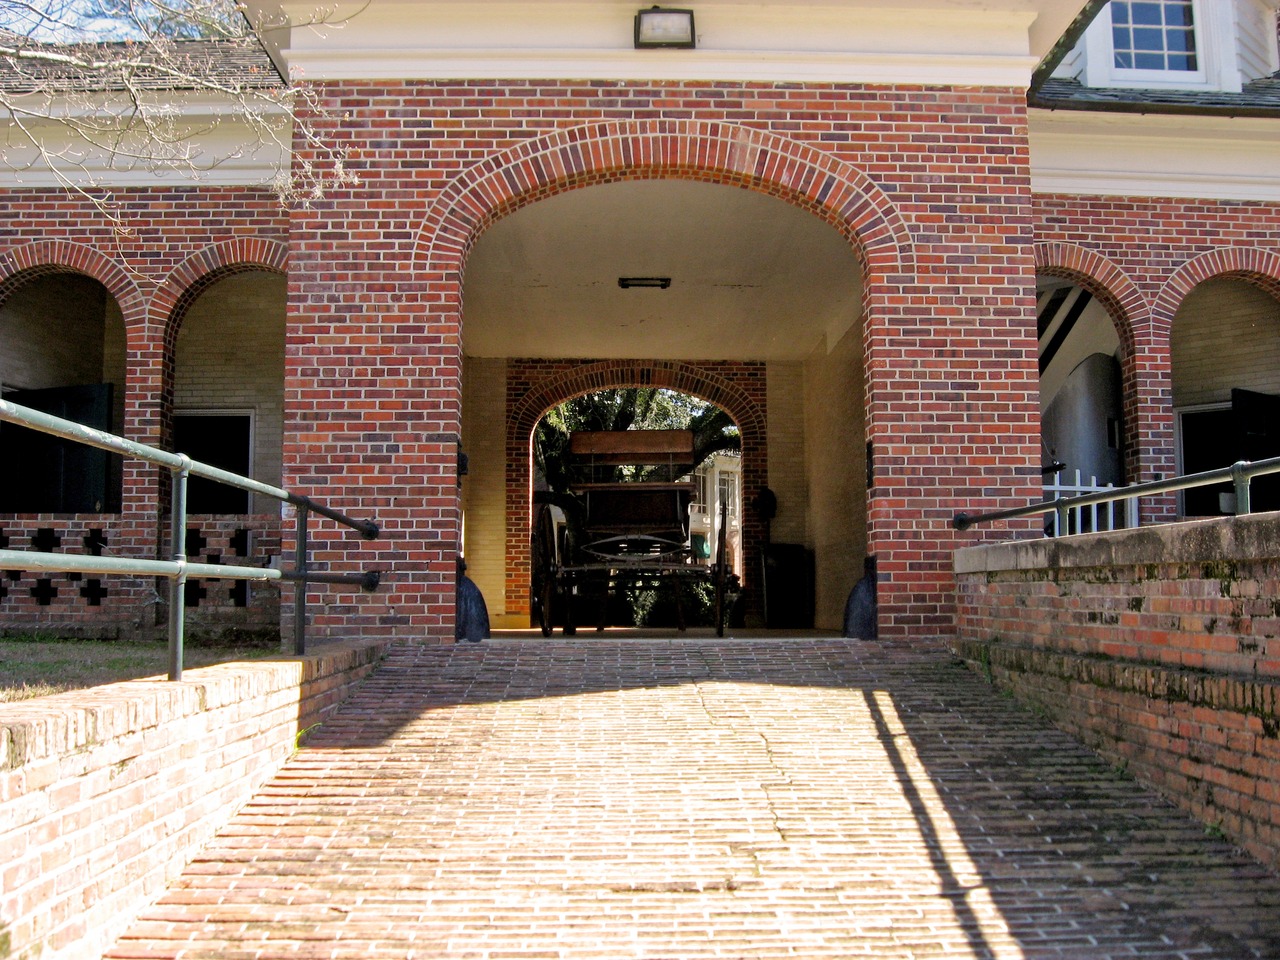 Stable Complex (1928) at Pebble Hill Plantation.